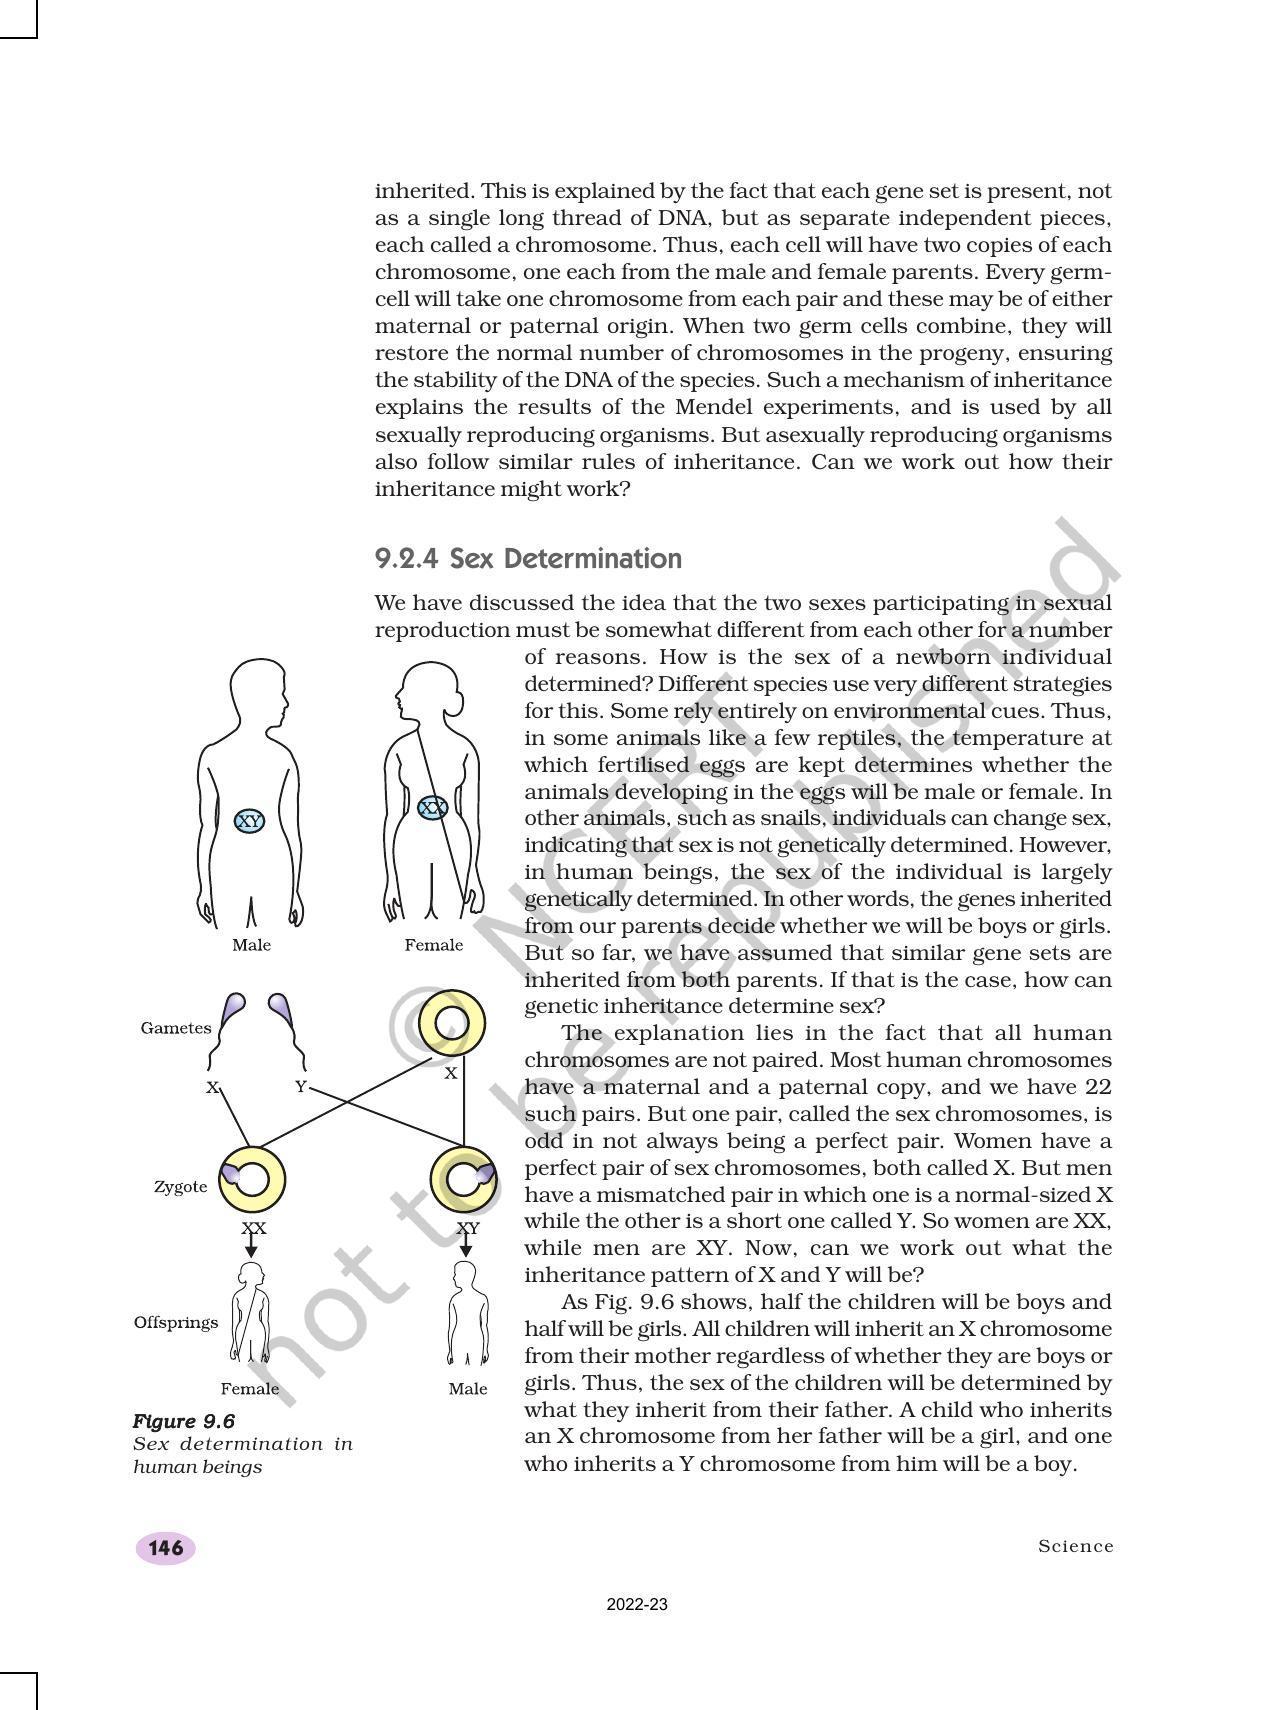 NCERT Book for Class 10 Science Chapter 9 Heredity and Evolution - Page 5